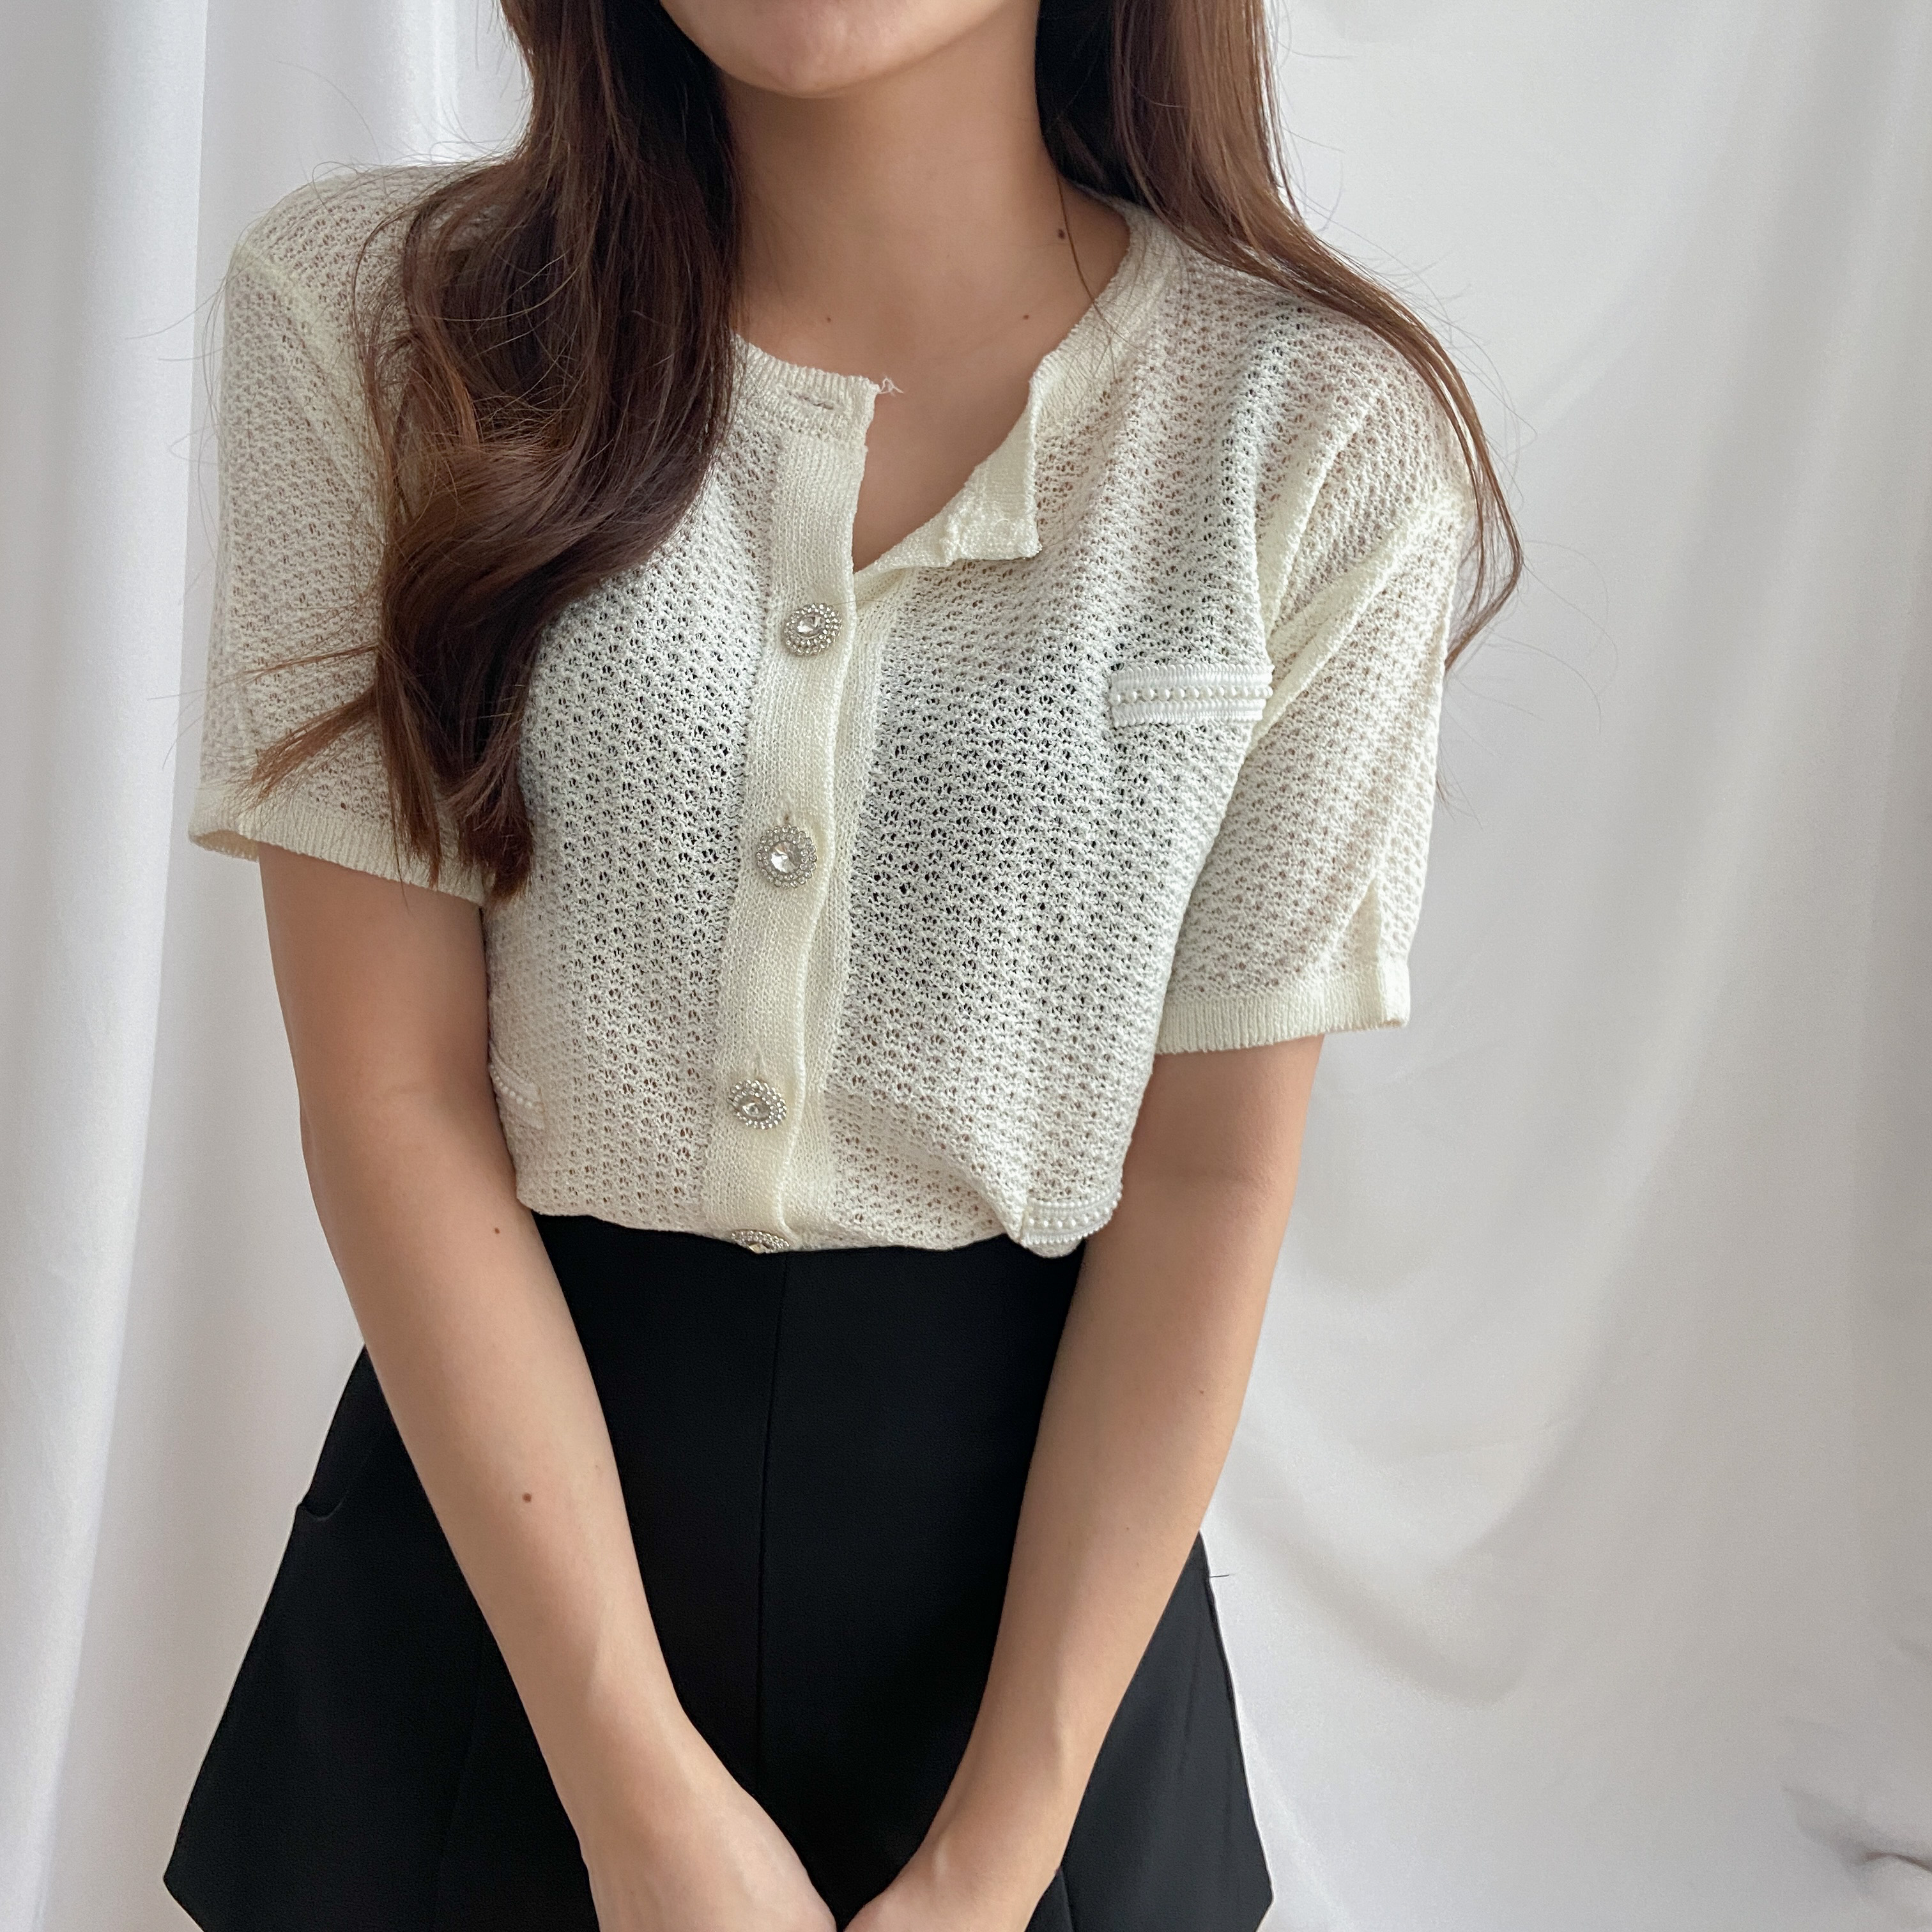 [REJECTED ITEM] Pearl Button White Coco Top 